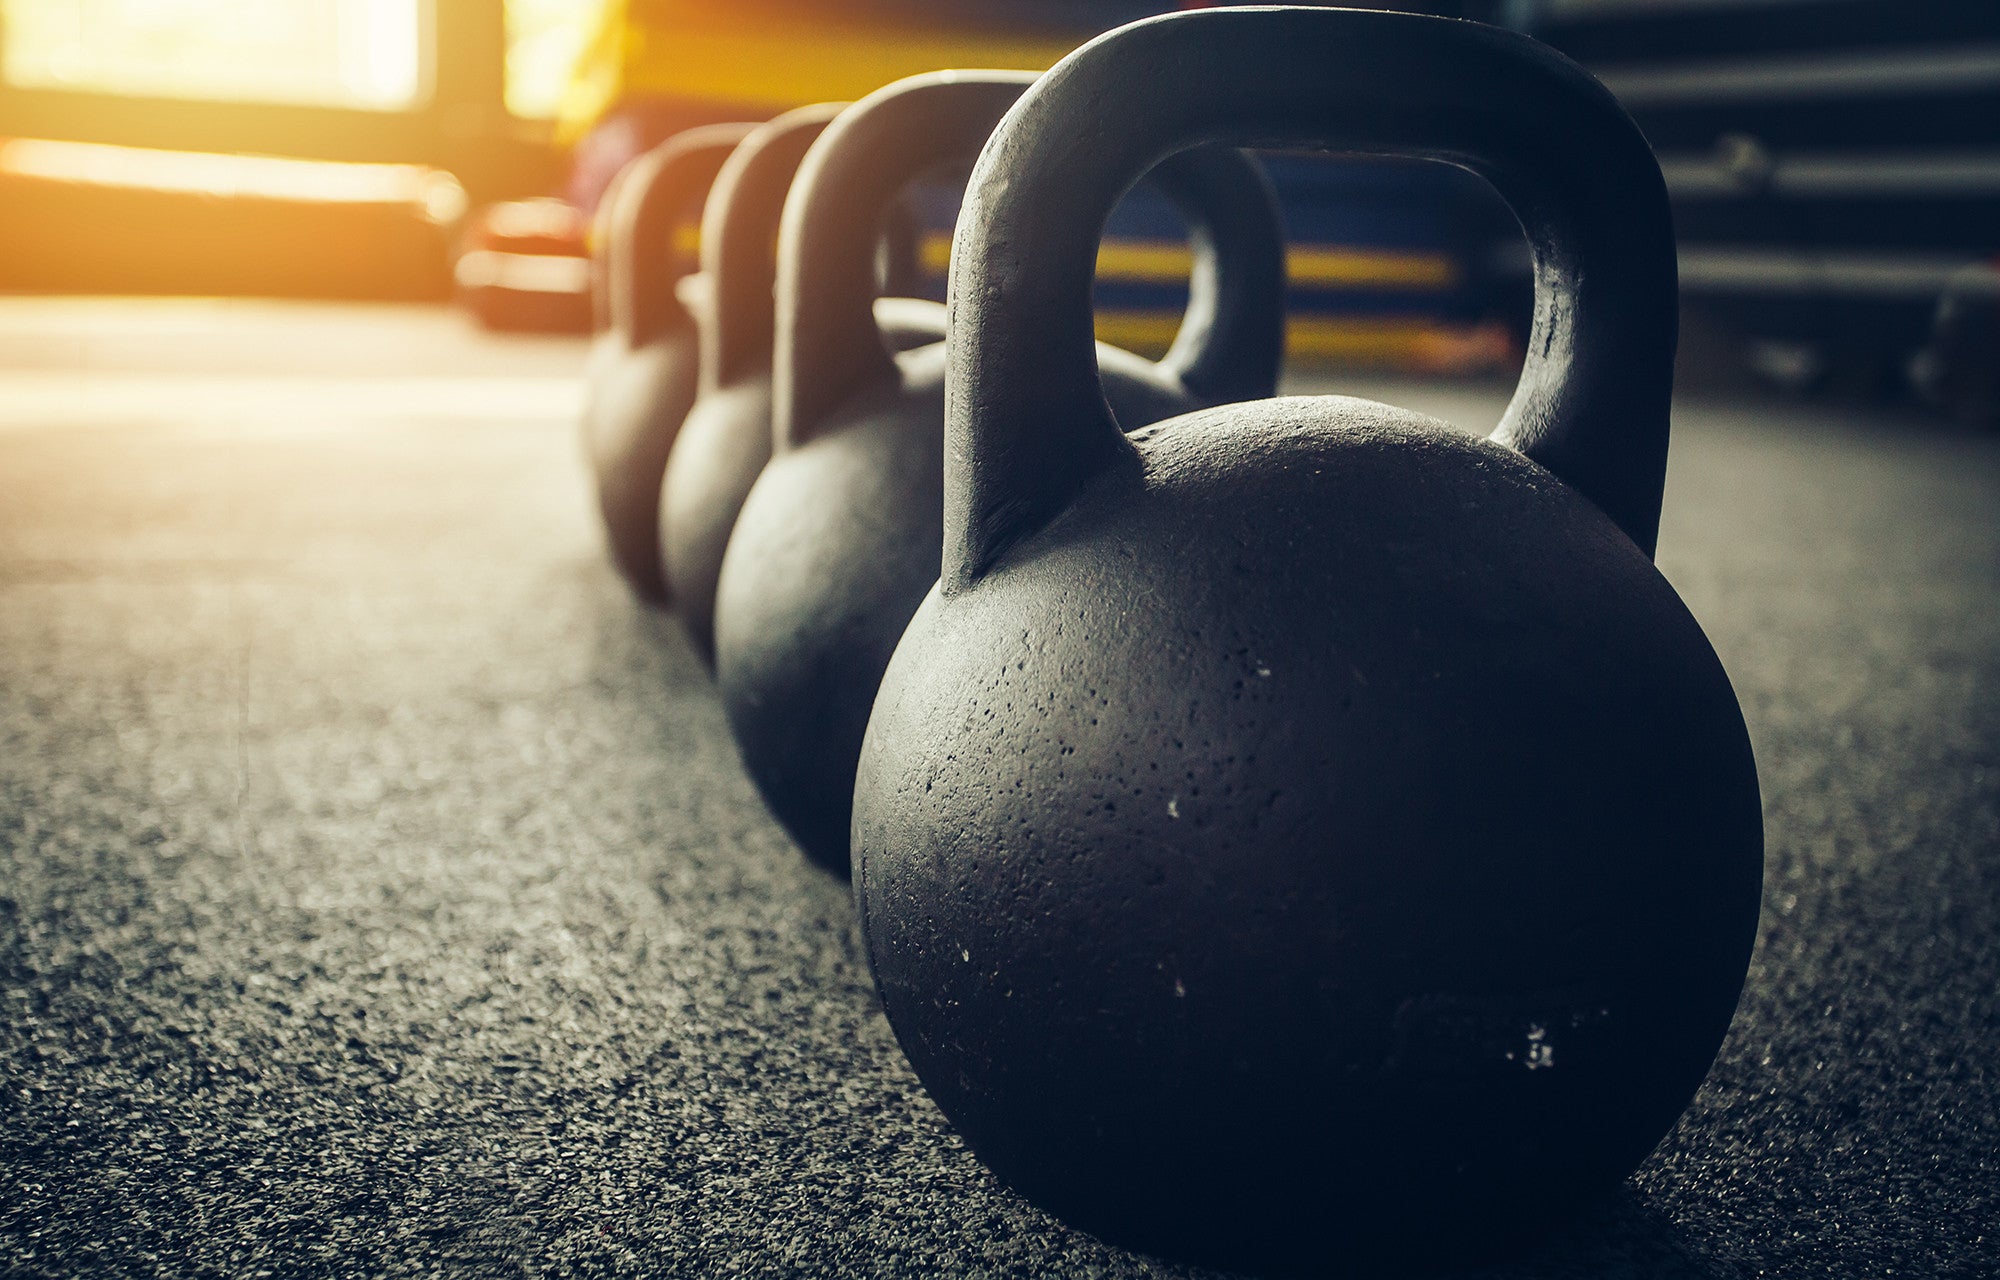 6 Simple Kettlebell Exercises to Do in 20 Minutes